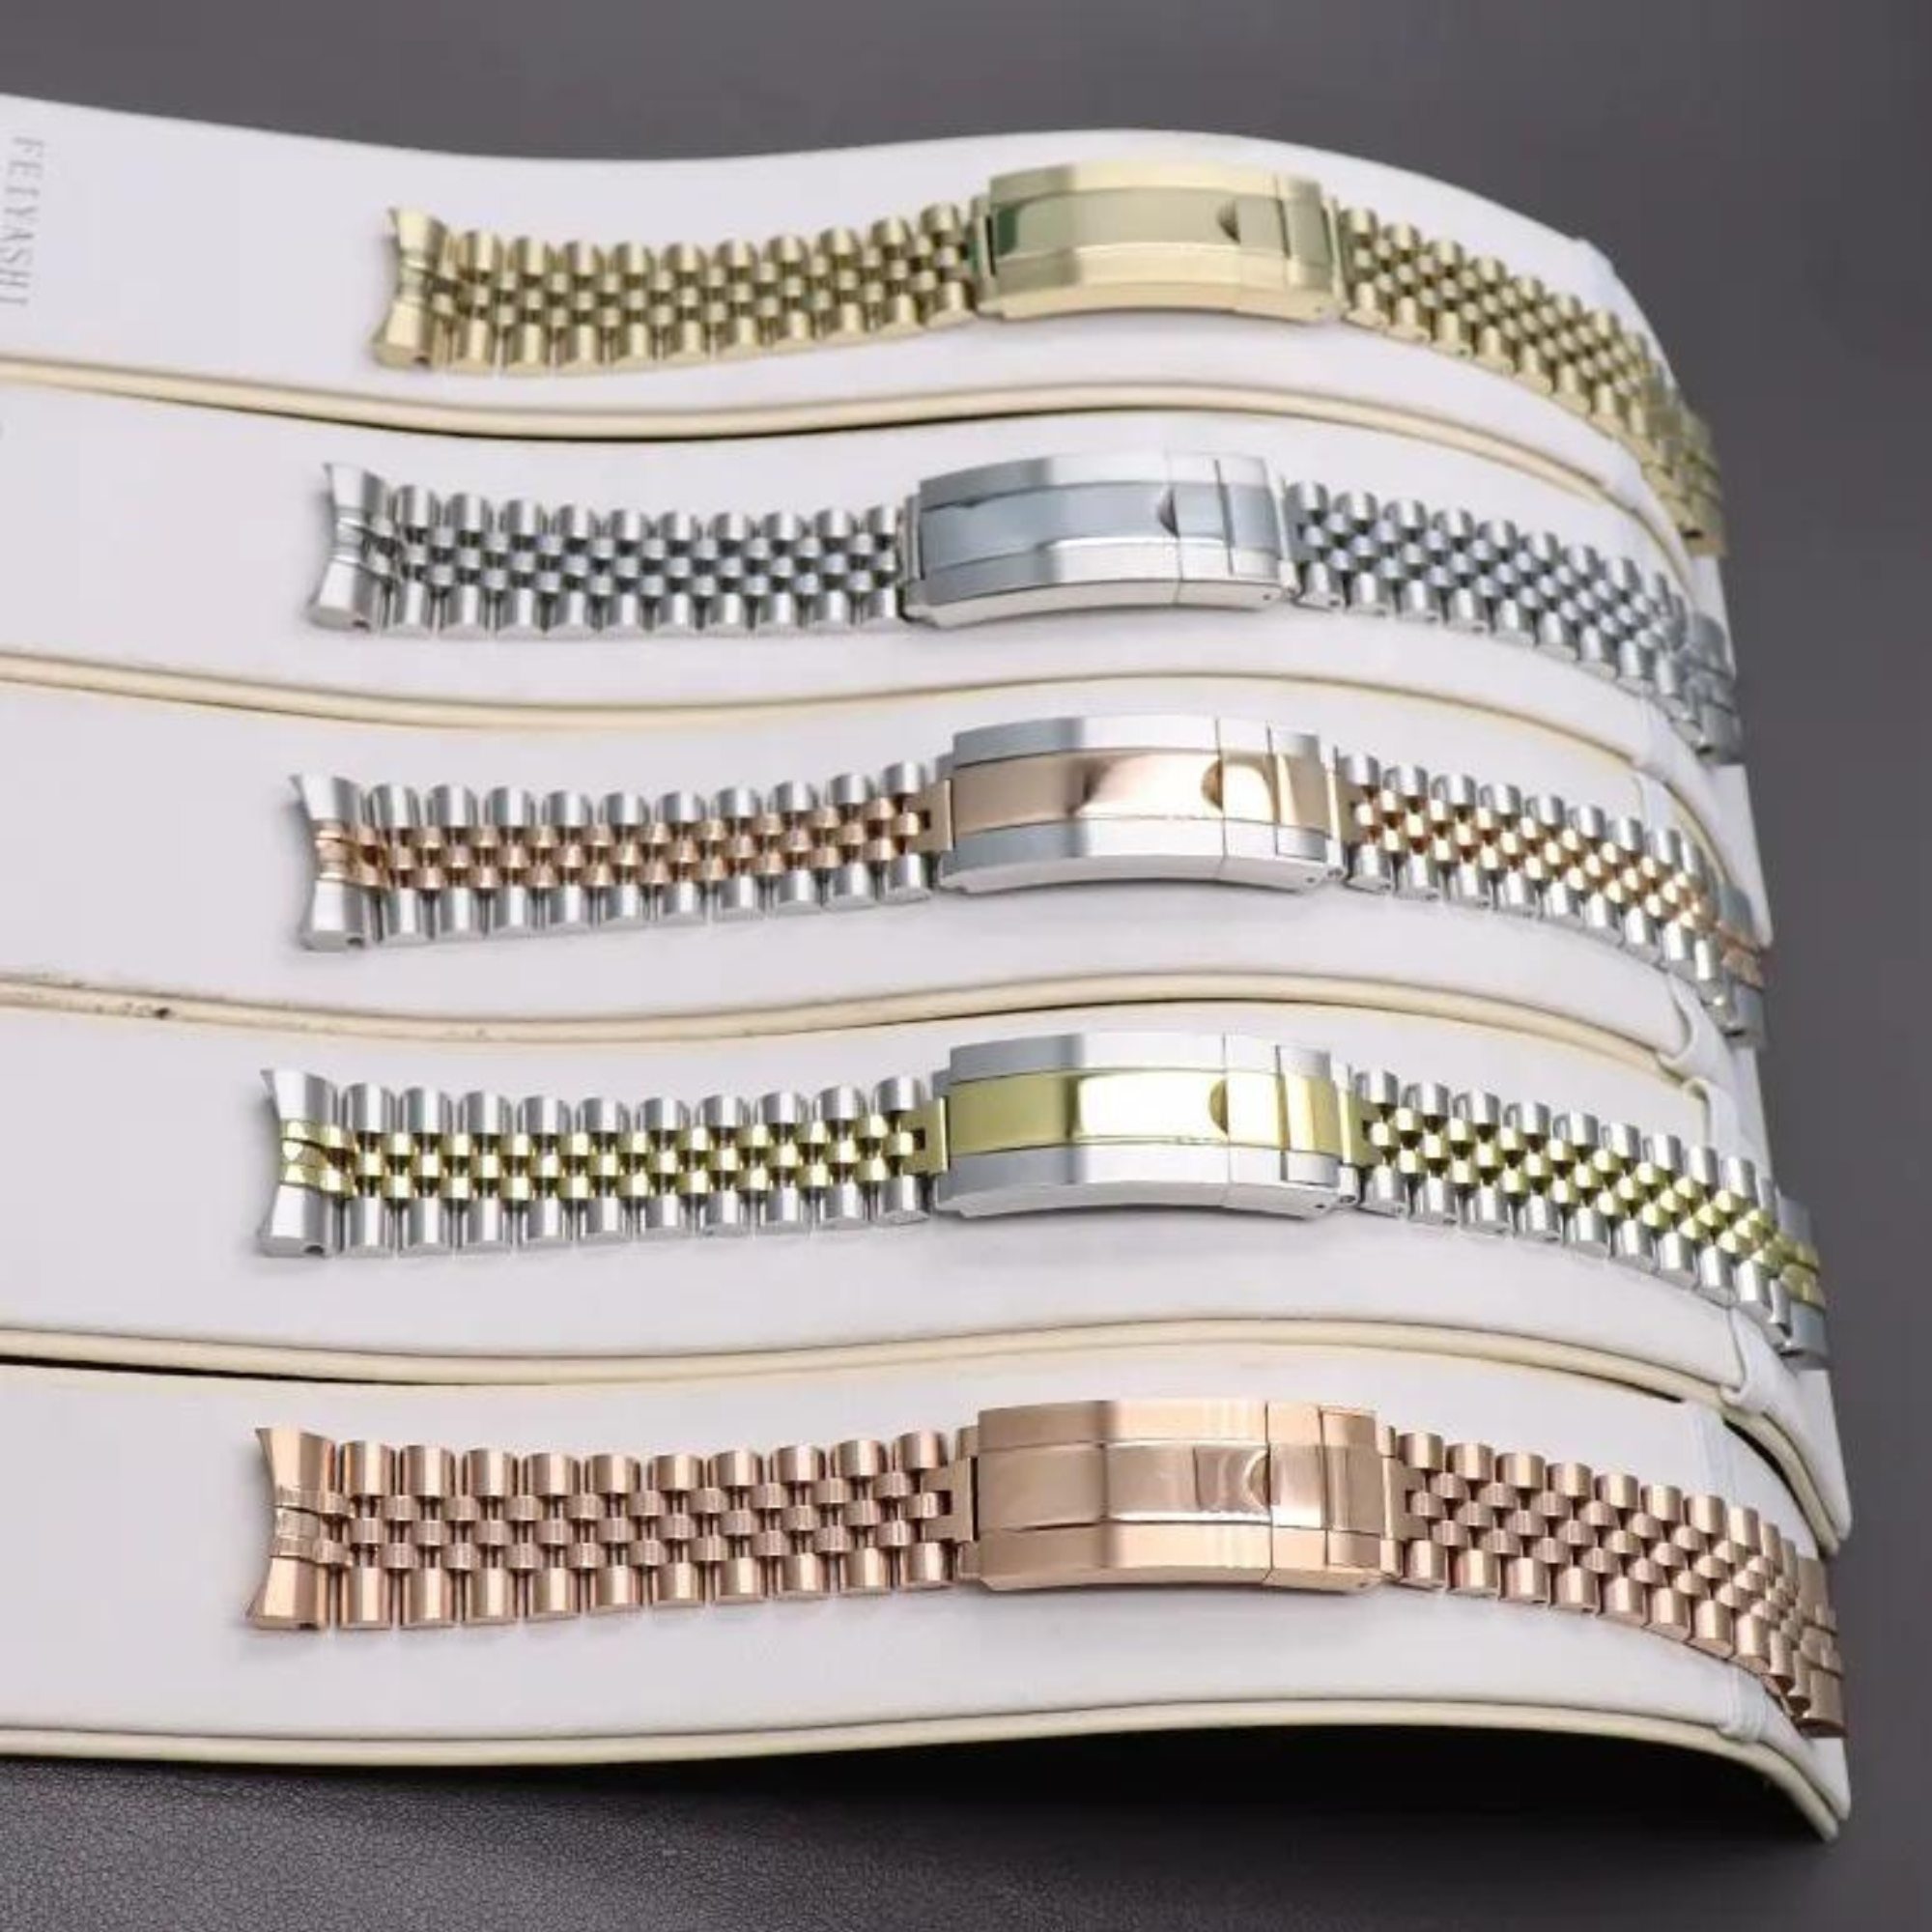 How to Match Bracelets with Your Watch – Corona Watches